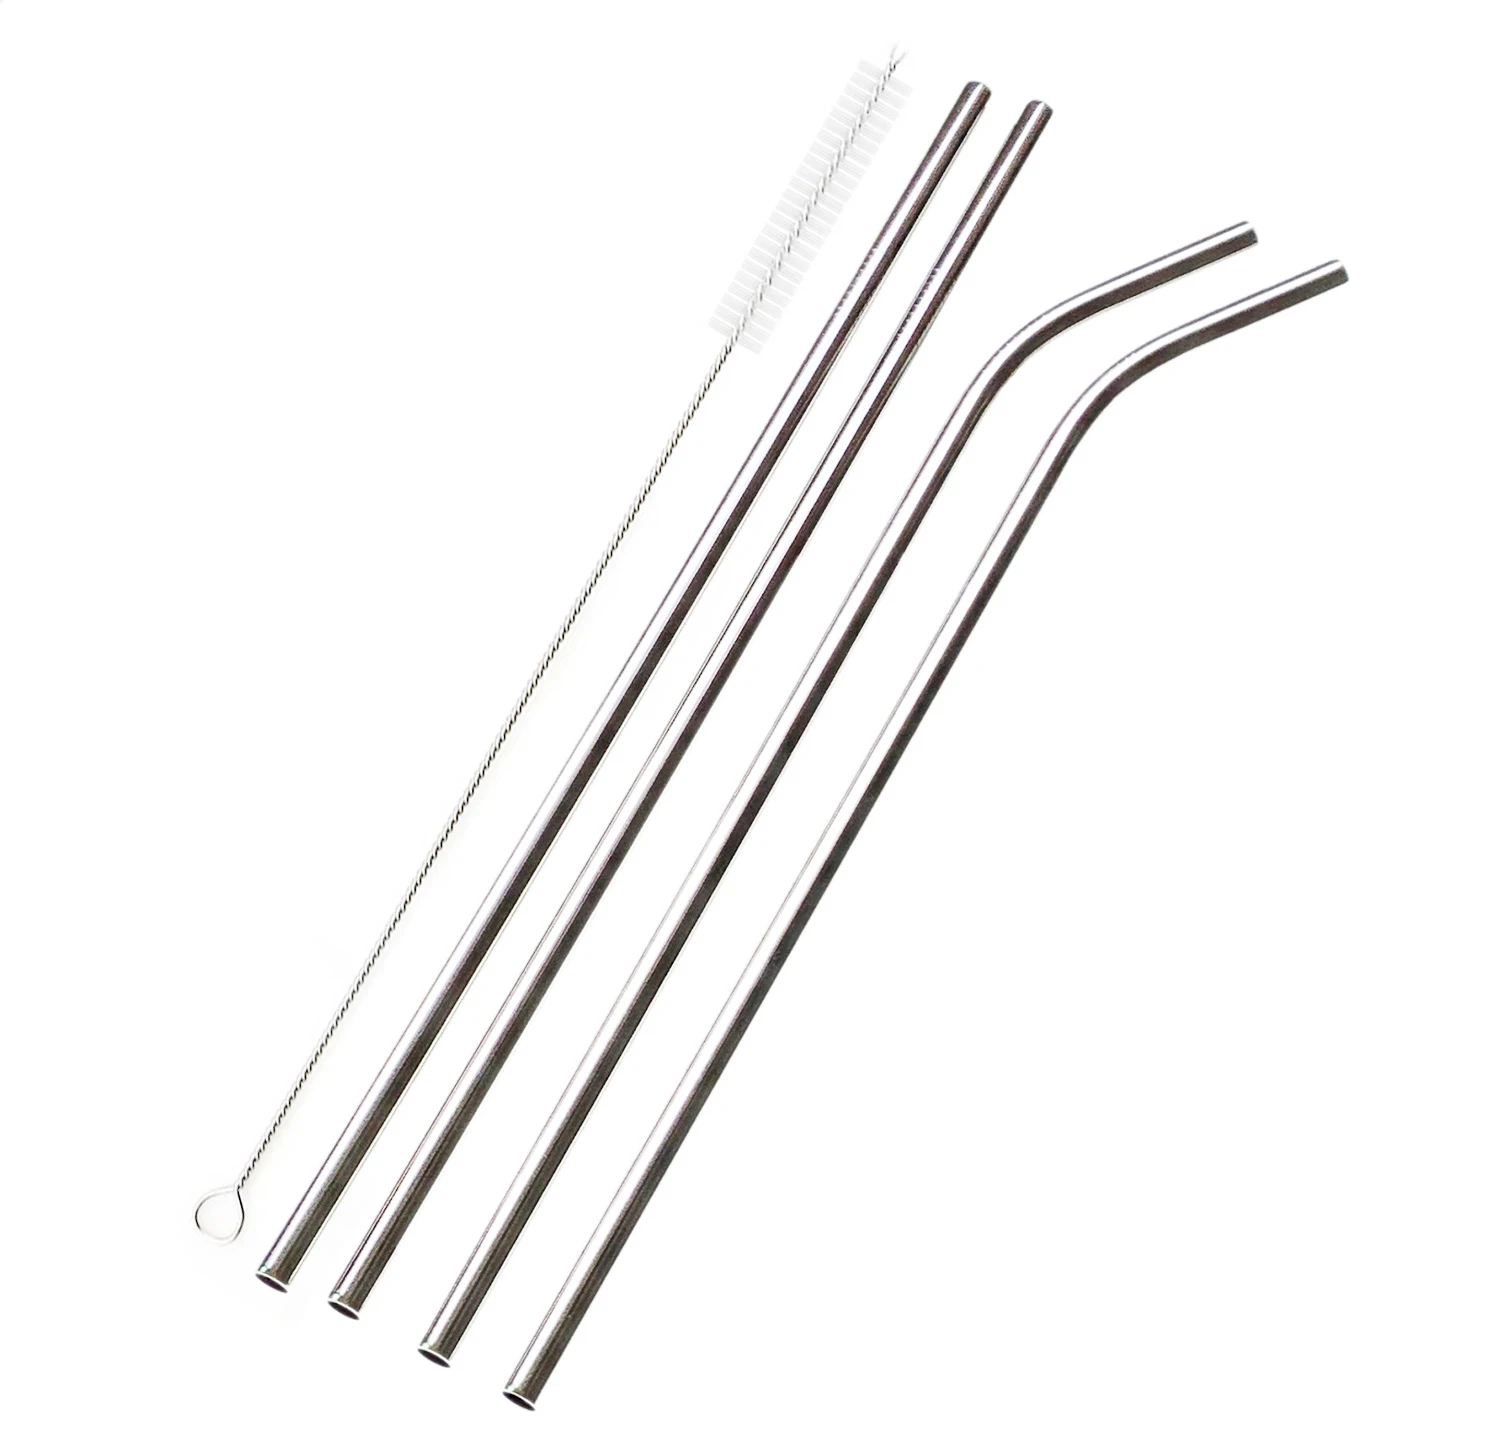 12 inch Colorful Stainless Steel Straws